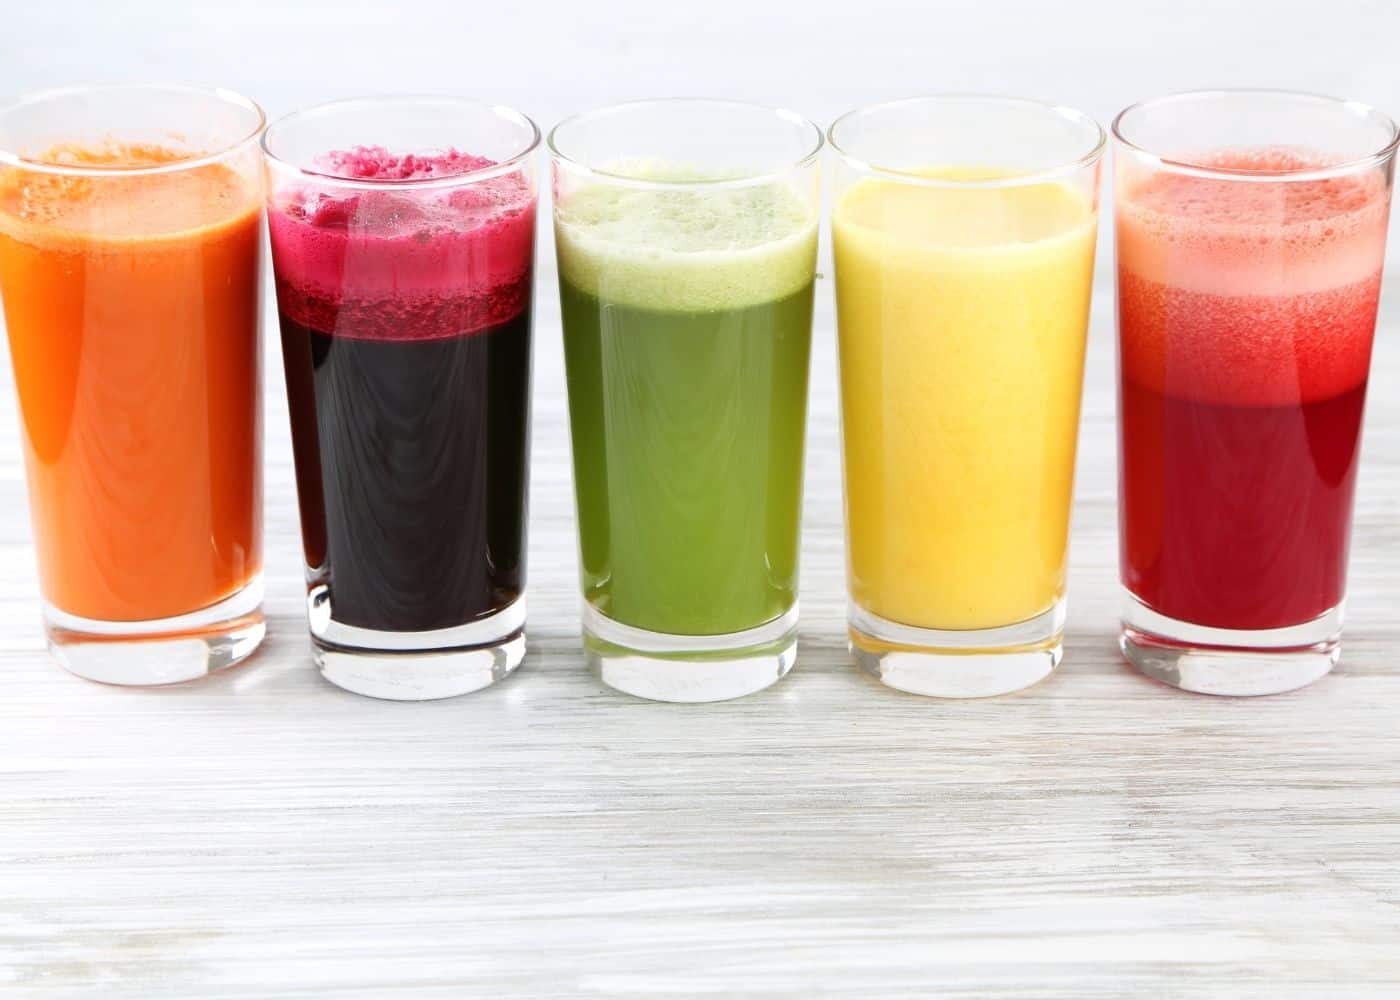 https://www.cleaneatingkitchen.com/wp-content/uploads/2021/01/five-colorful-juices-lined-up.jpg